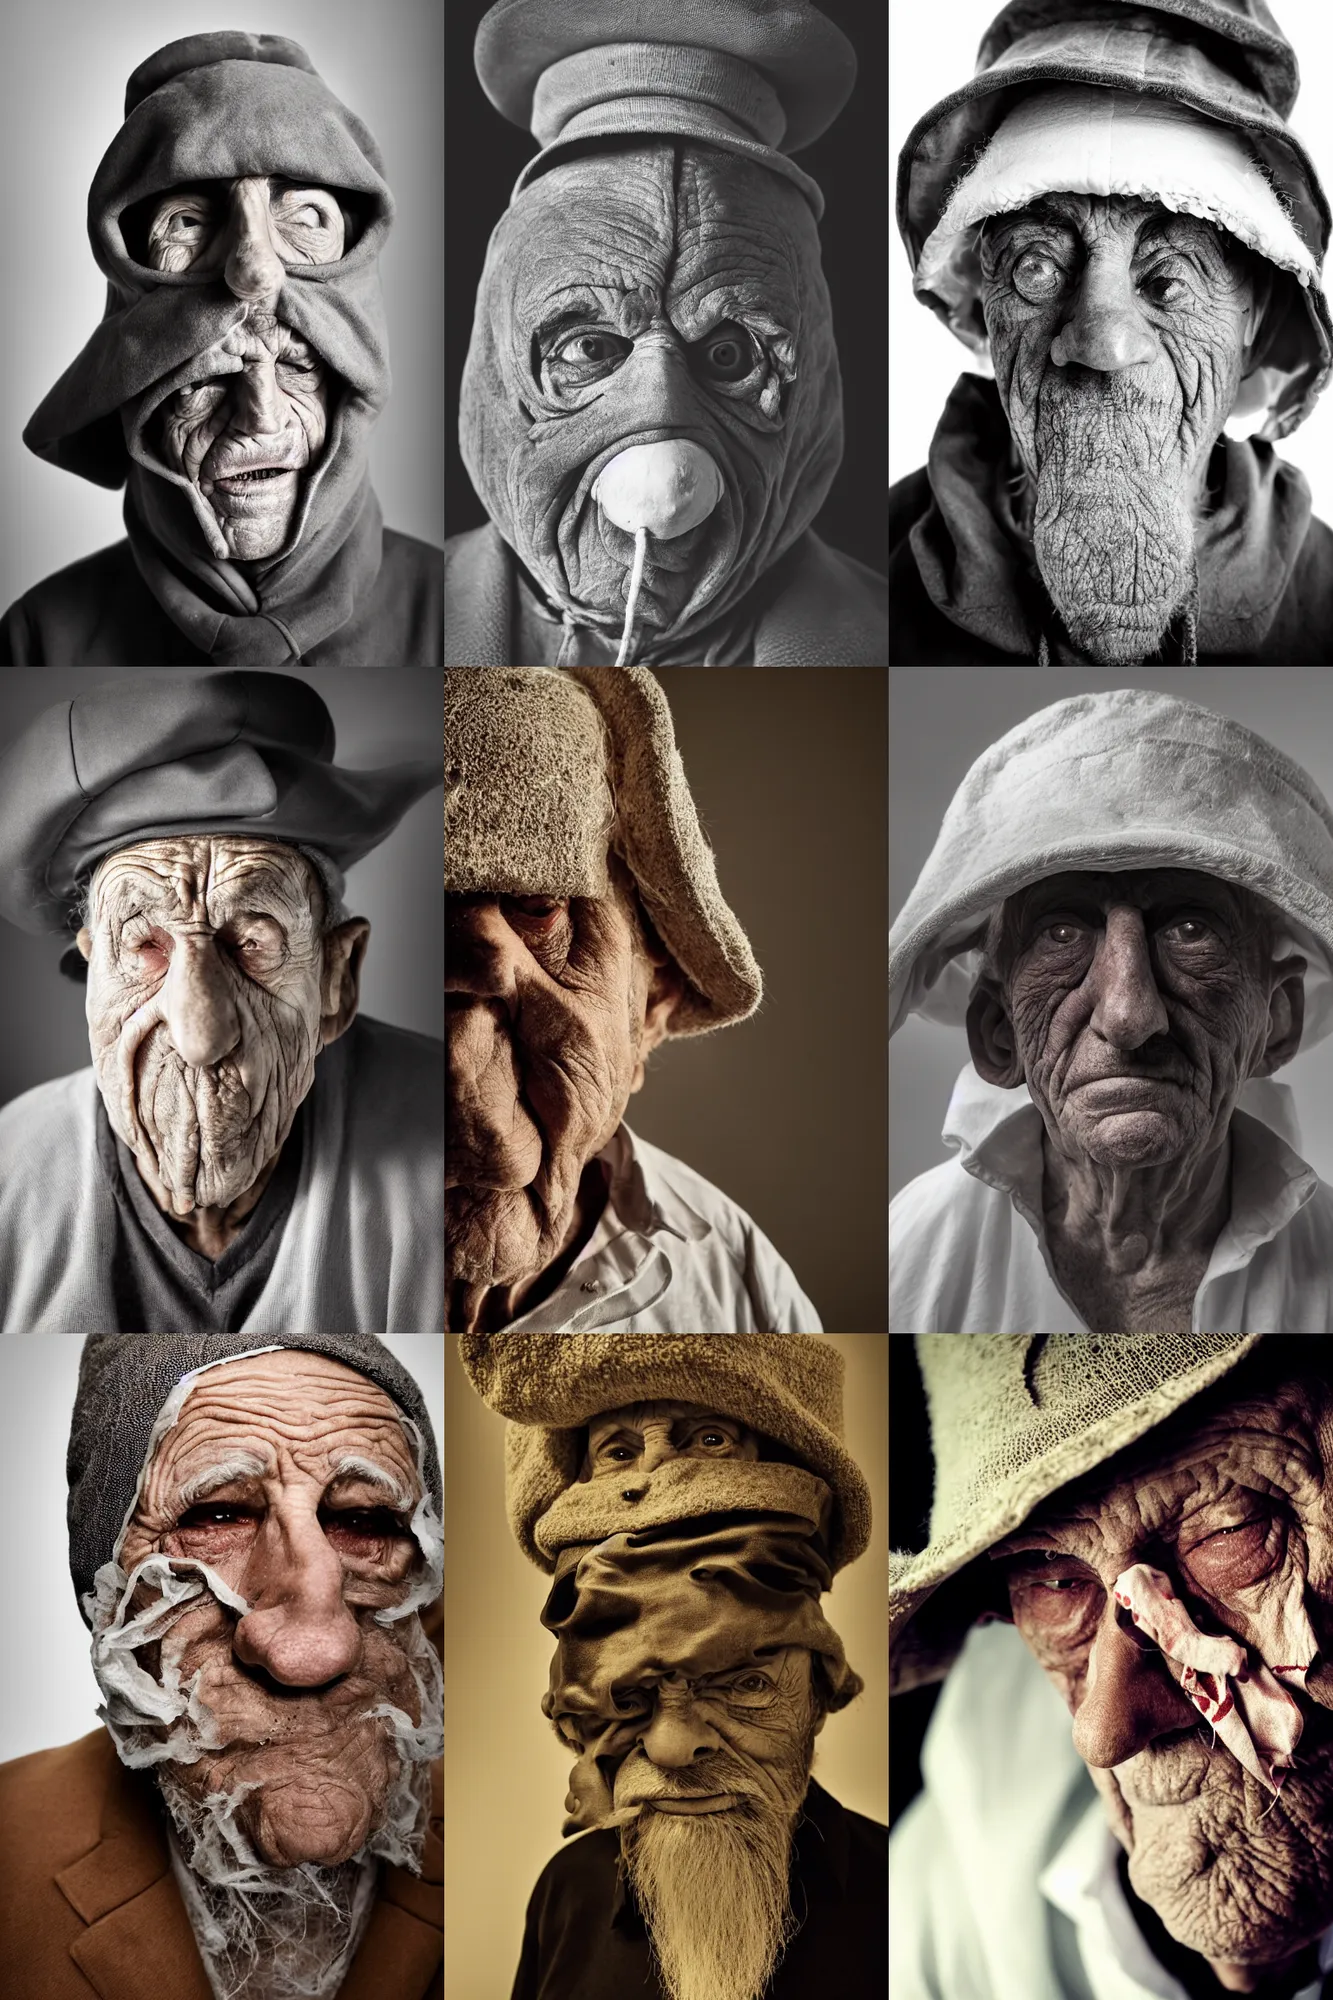 Prompt: high contrast studio close - up portrait of a wrinkled old man wearing a pulcinella mask, clear eyes looking into camera, baggy clothing and hat, backlit, dark mood, nikon, photo by annie leibovitz, masterpiece